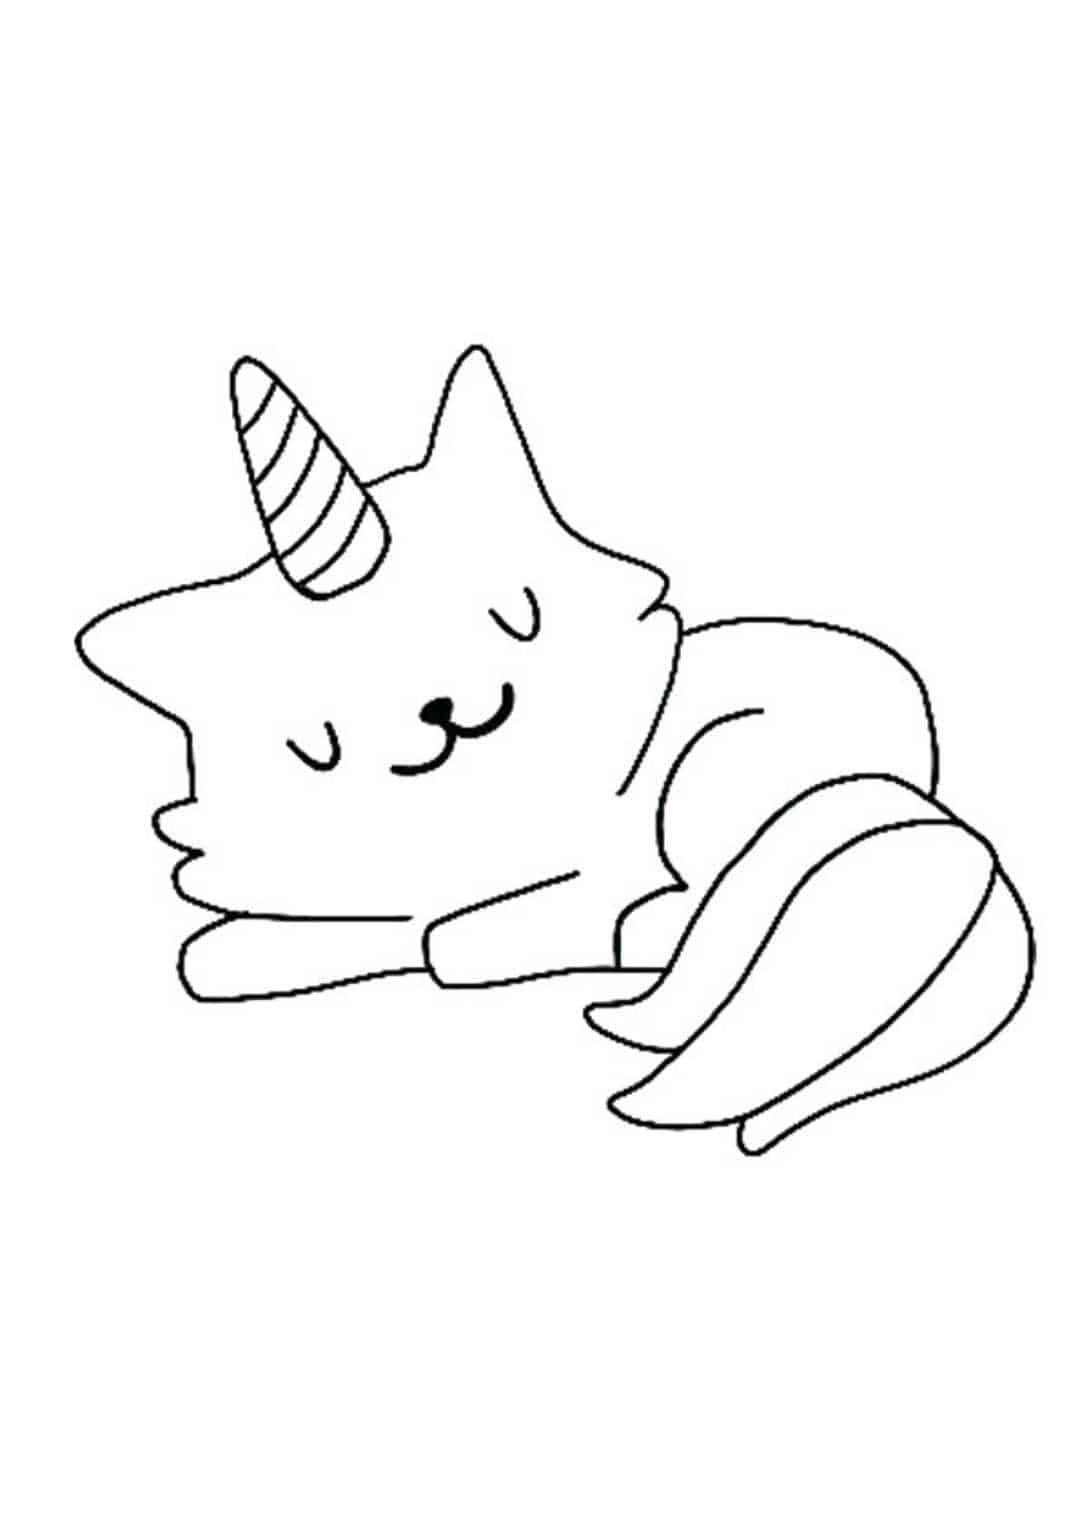 Cute Little Cat Unicorn Sleeping Coloring Page